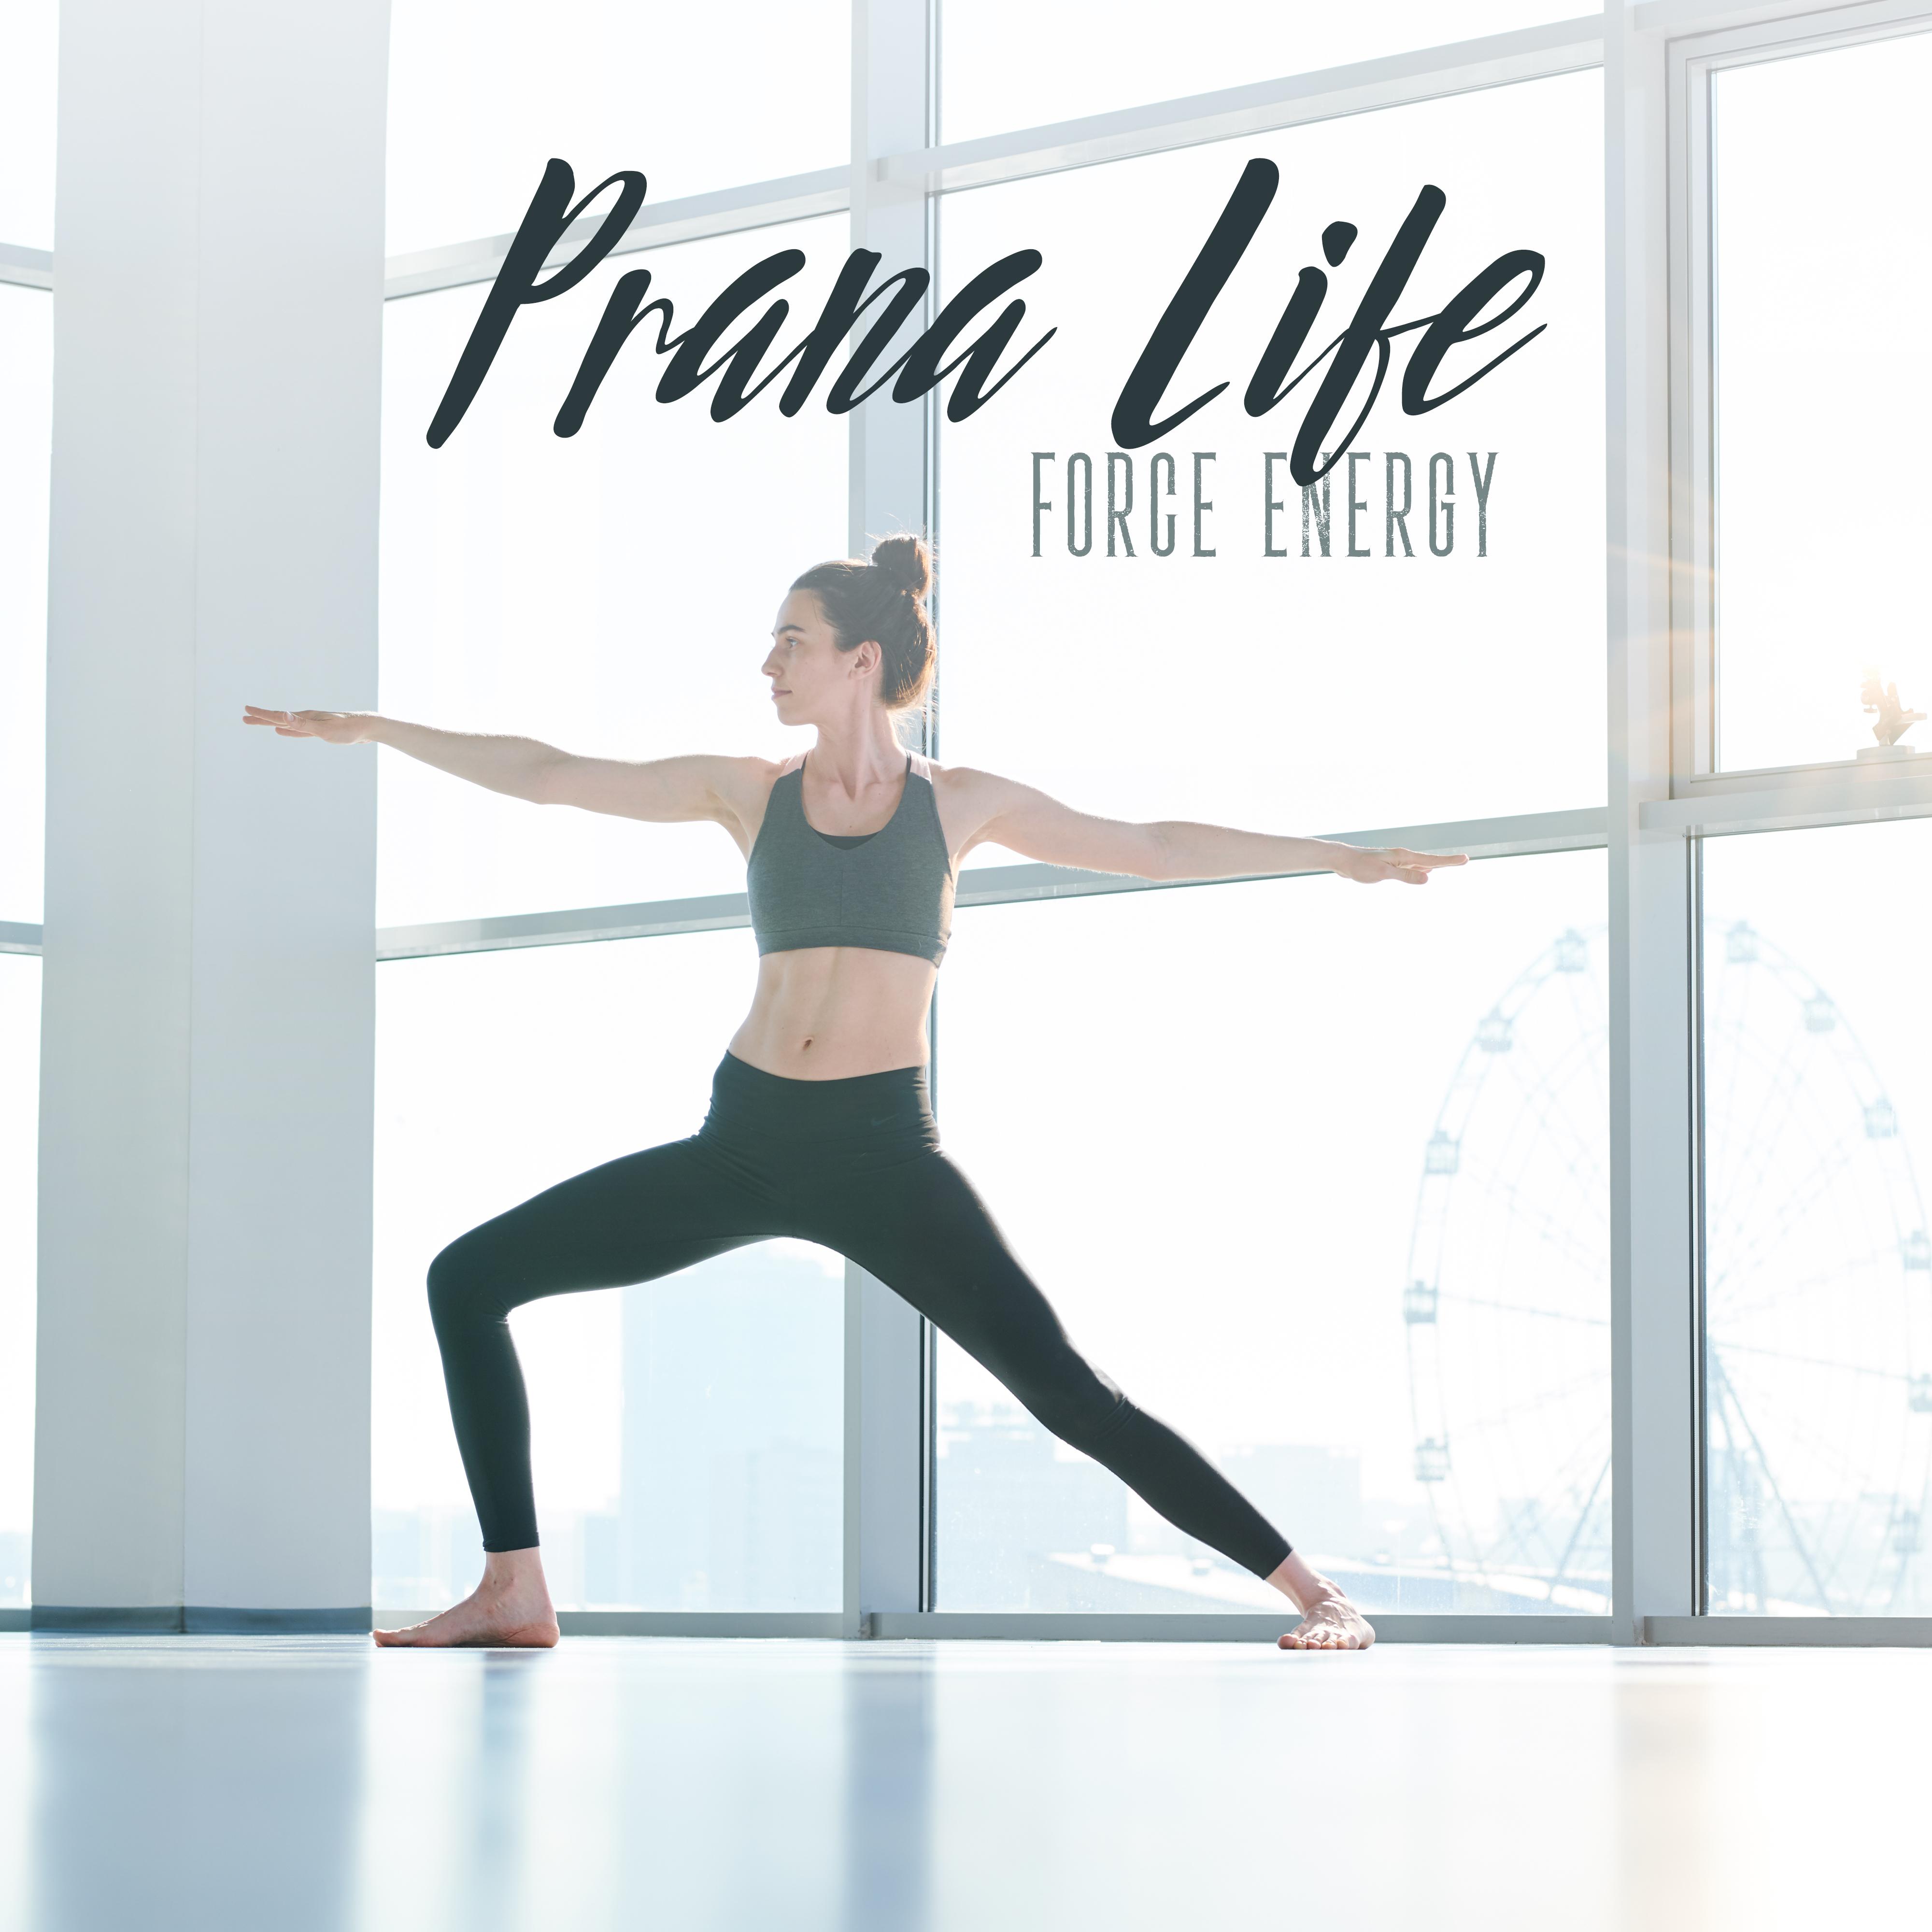 Prana Life Force Energy: Music for Meditation, Yoga Exercises, Daily Practice of Breathing, Affirmation, Helping to Free Yourself from Stress and Negative Emotions